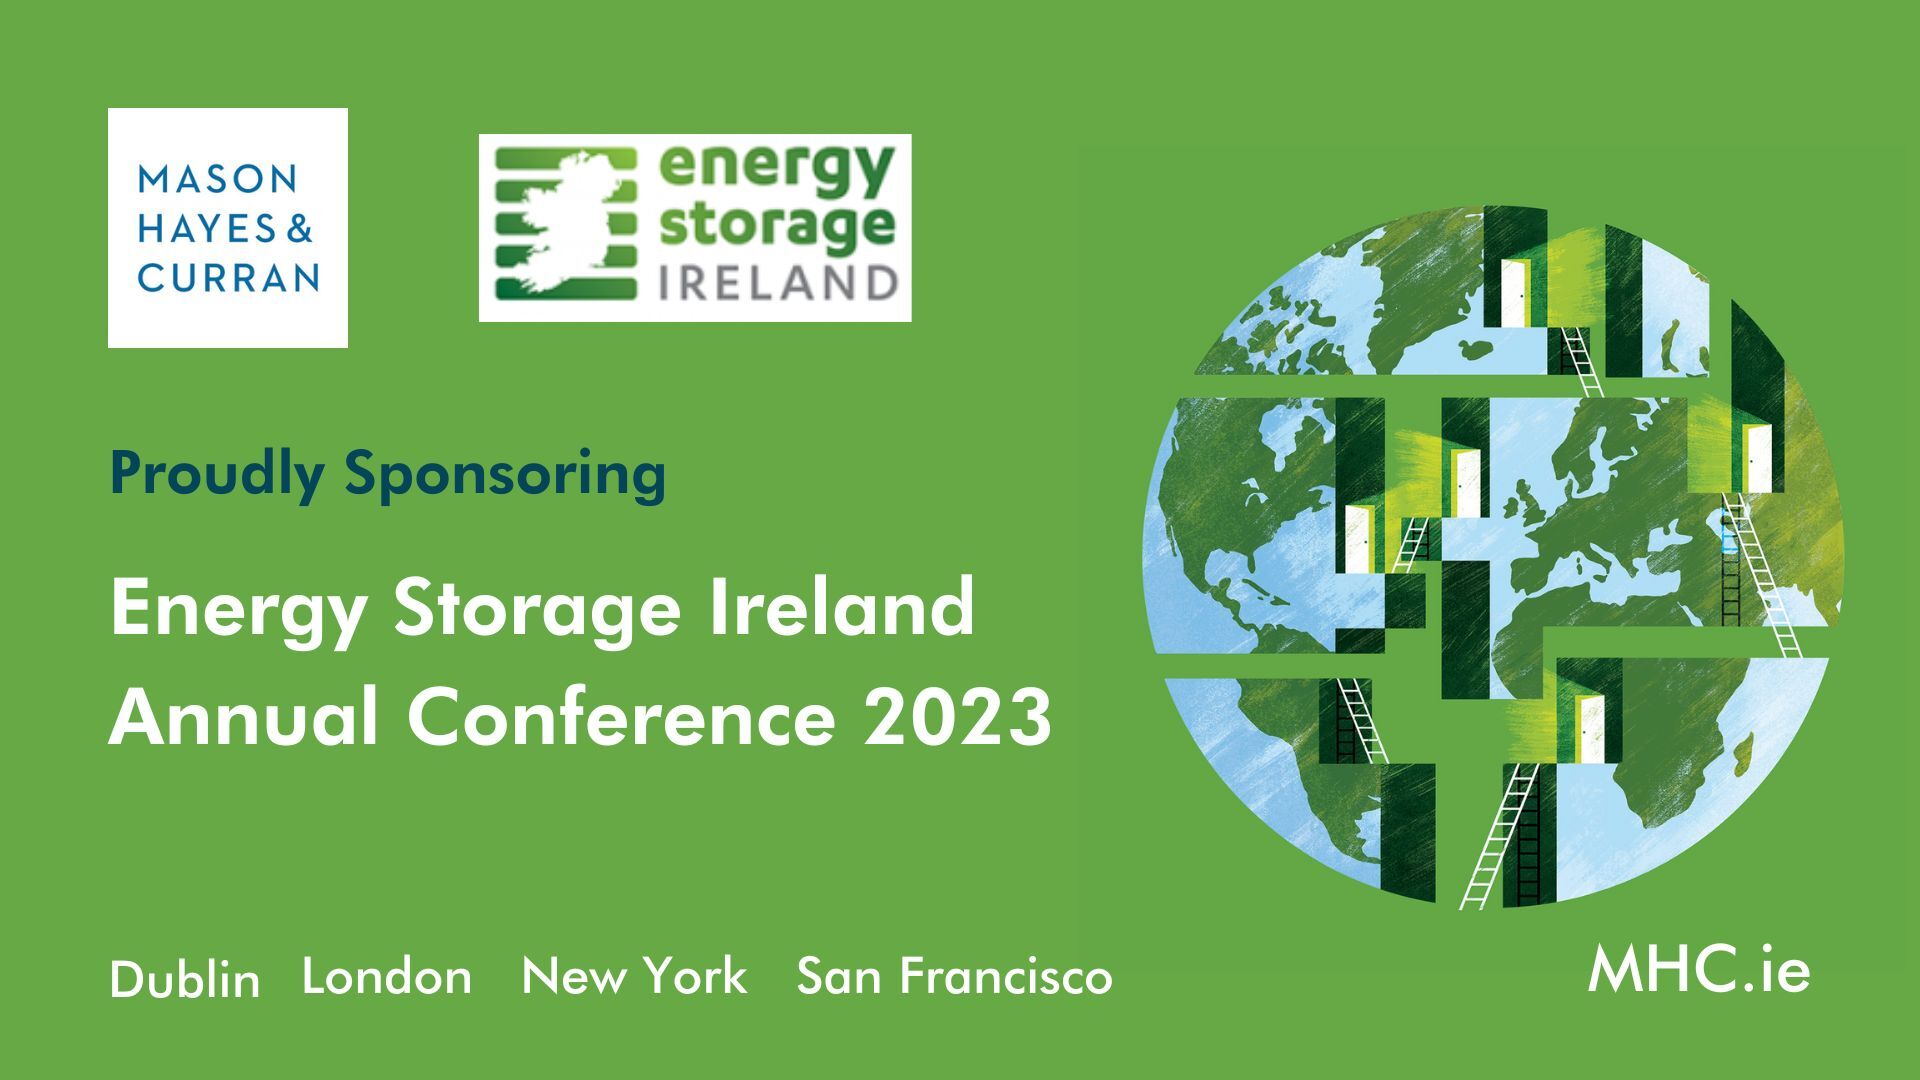 White writing on a green background, saying Energy Storage Ireland Annual Conference 2023